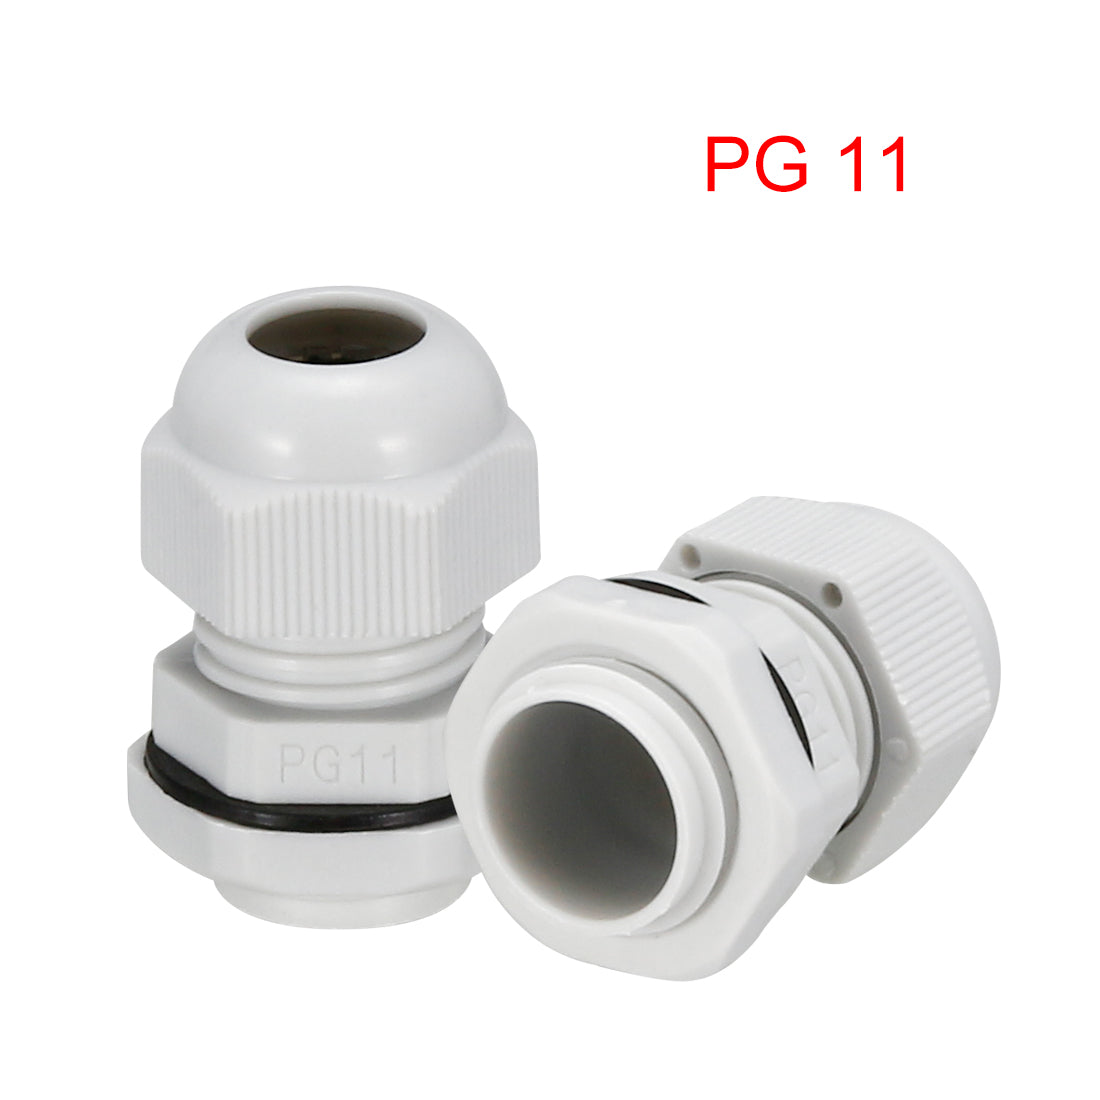 uxcell Uxcell 5Pcs PG11 Cable Gland Waterproof Plastic Joint Adjustable Locknut White for 5mm-10mm Dia Cable Wire